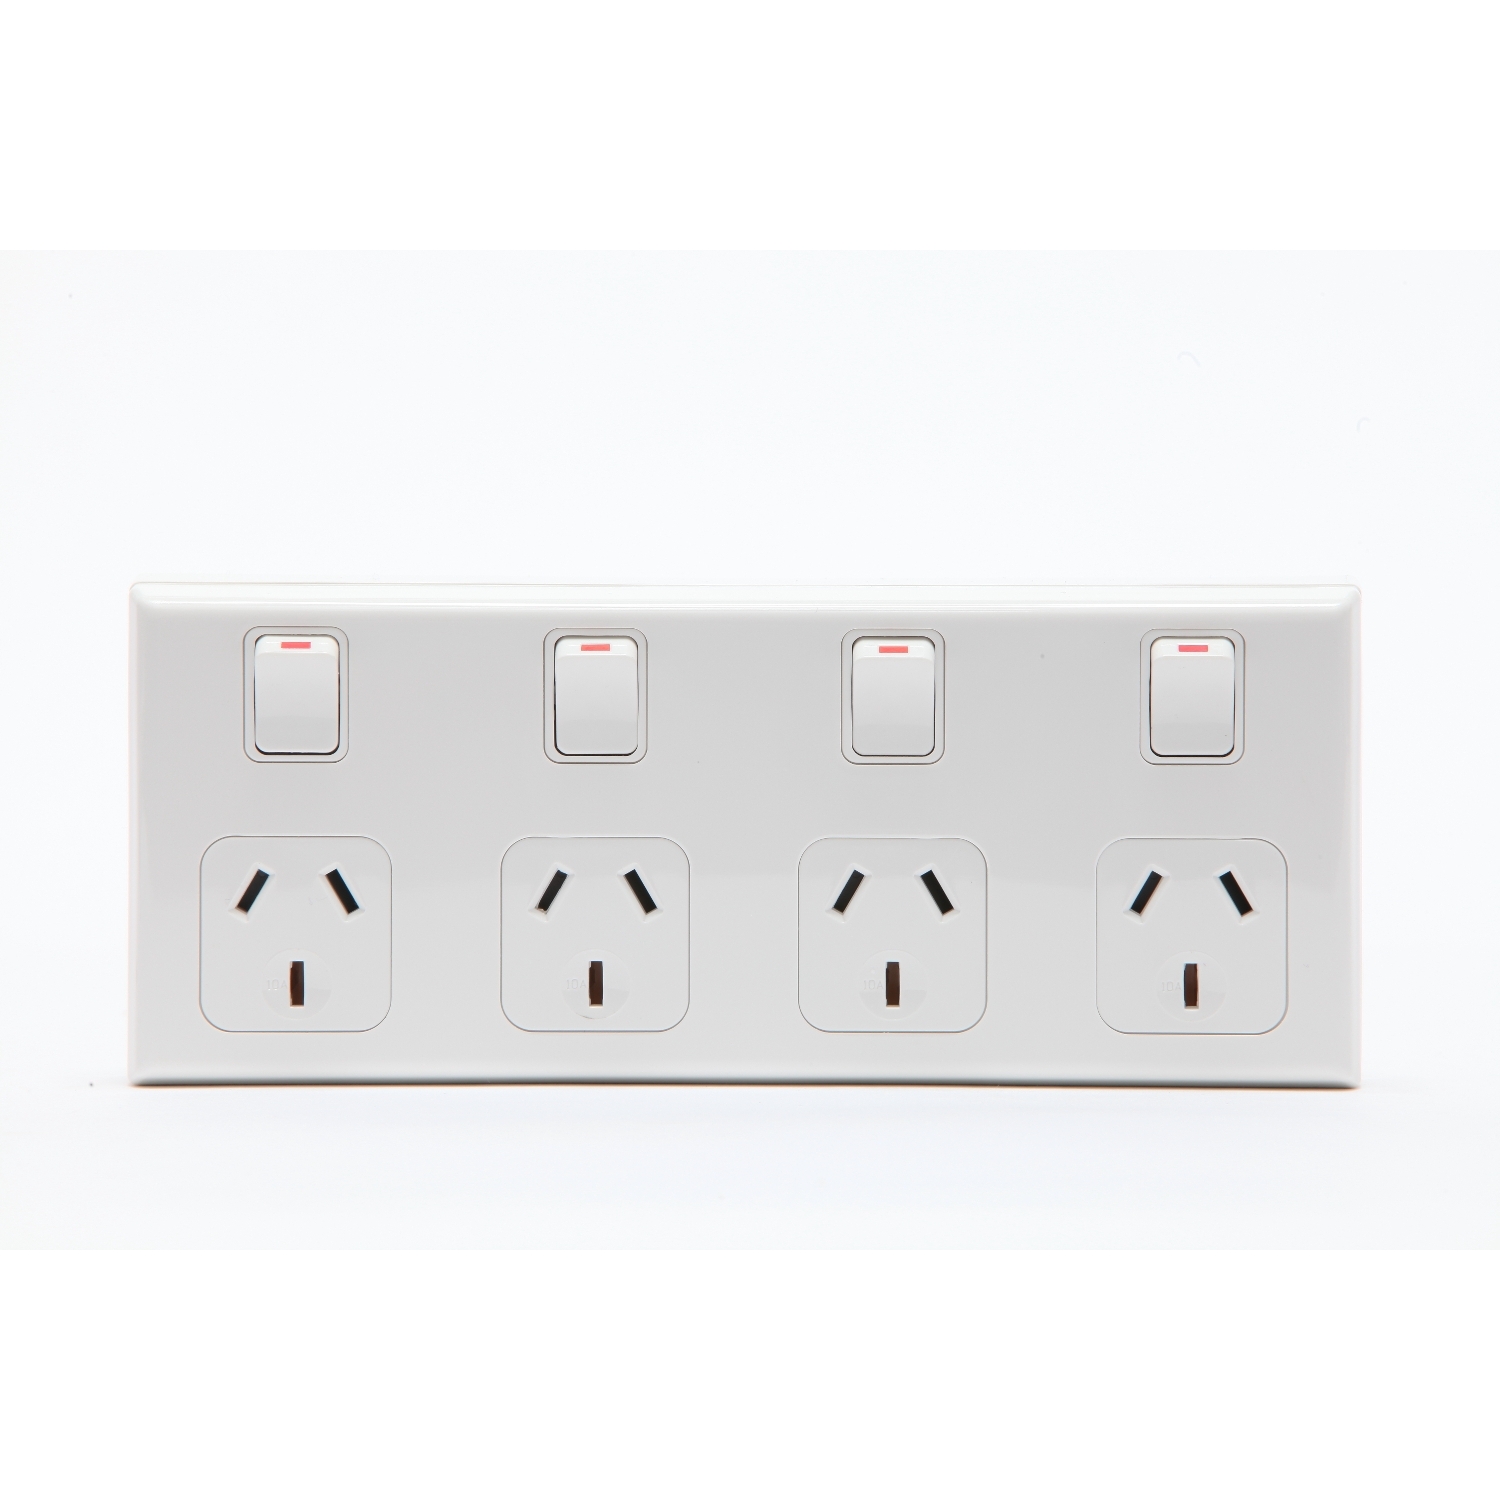 PDL 600 Series - Quad Switched Socket 10A Horizontal 4-Gang - White